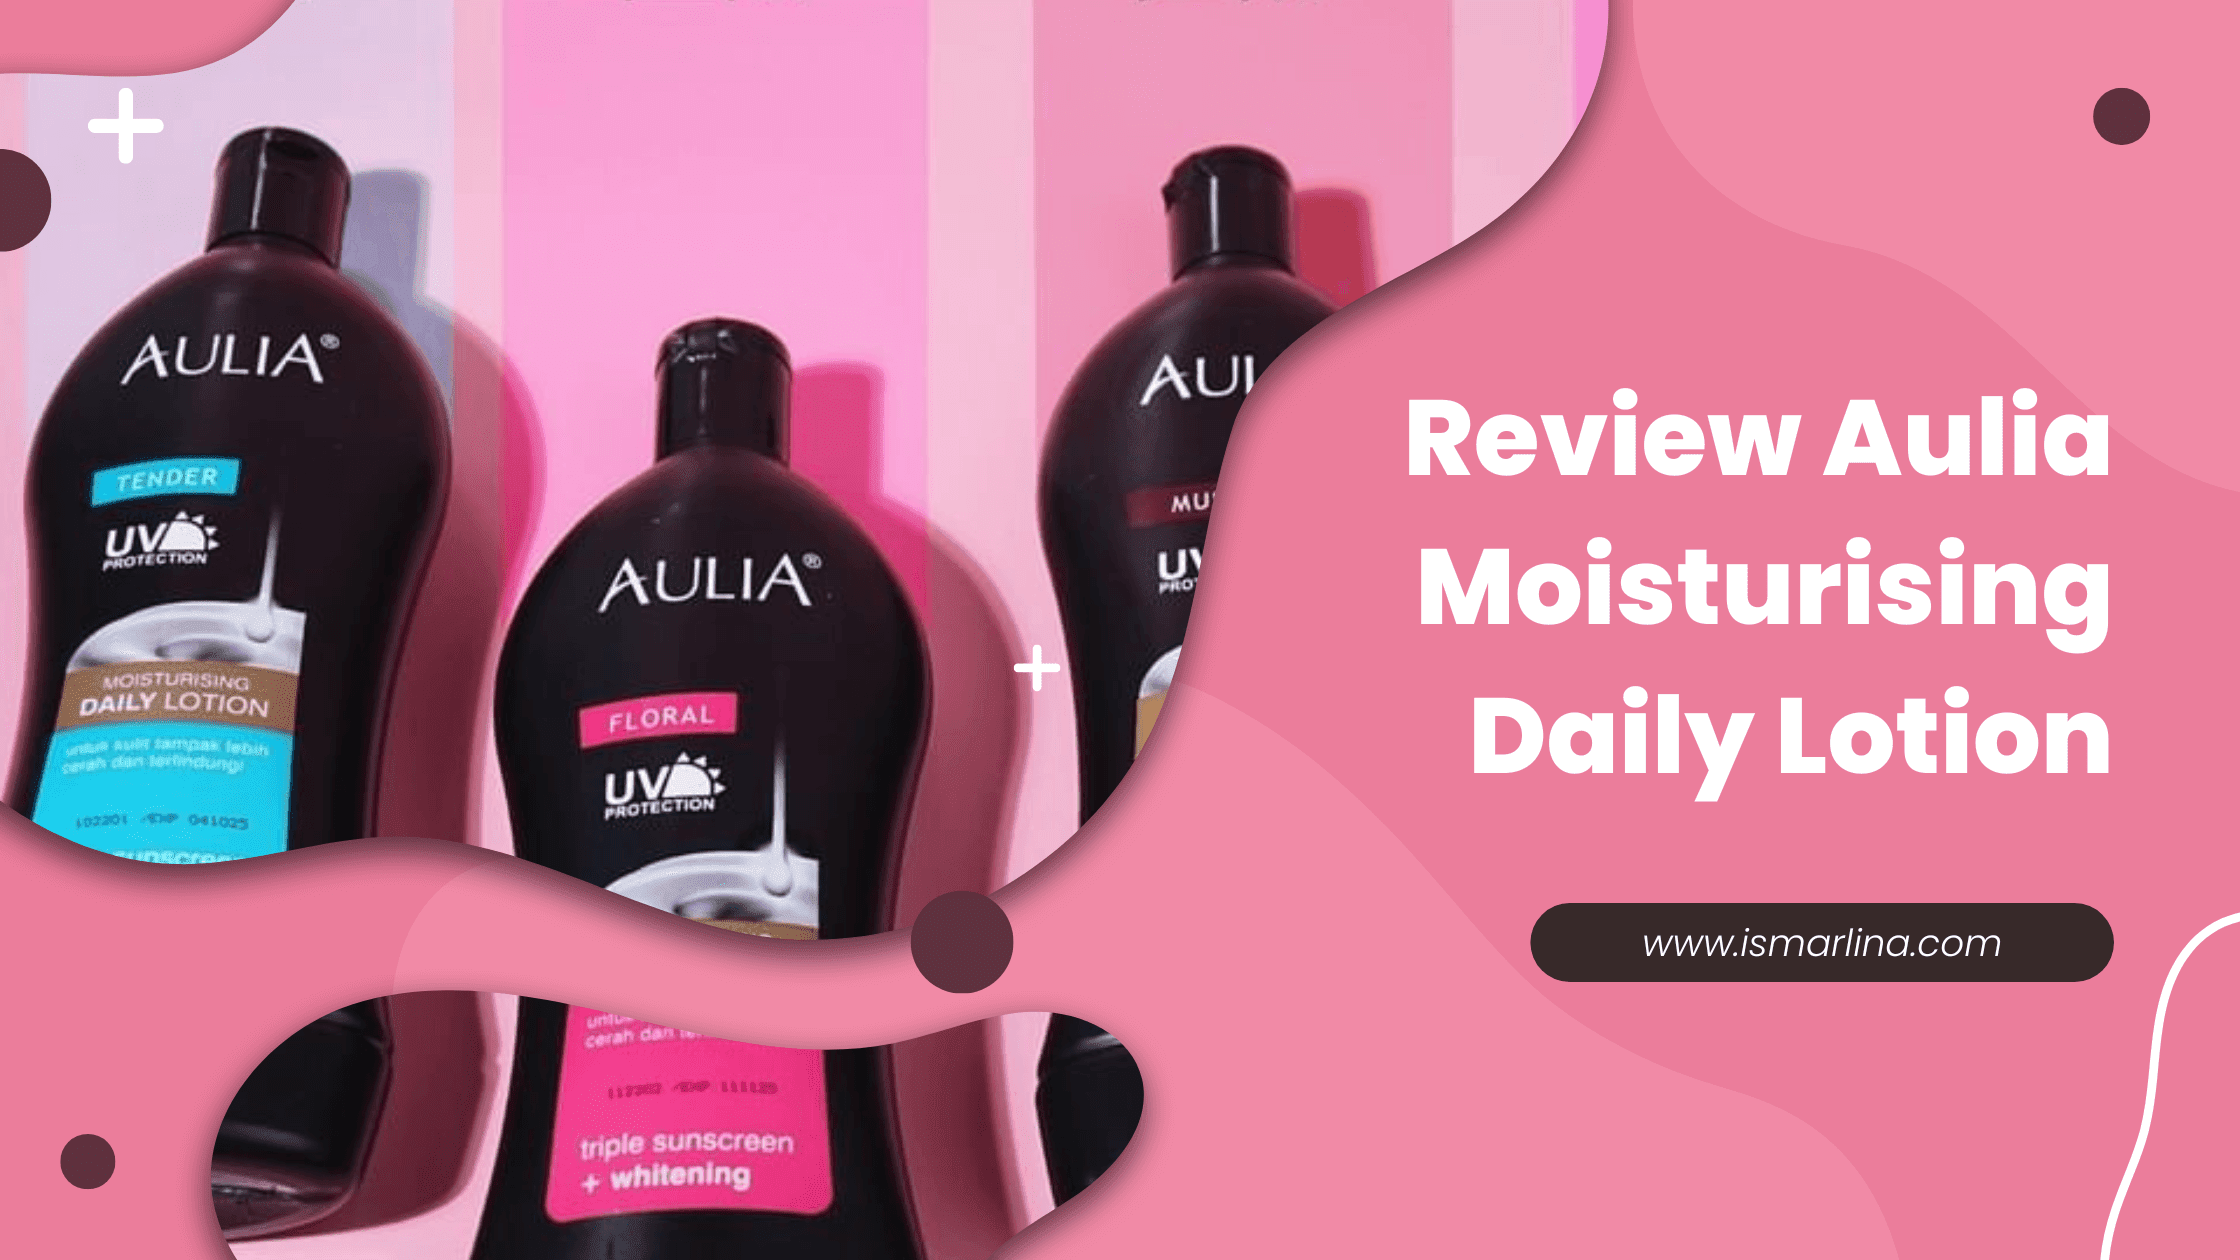 Review Aulia Moisturising Daily Lotion